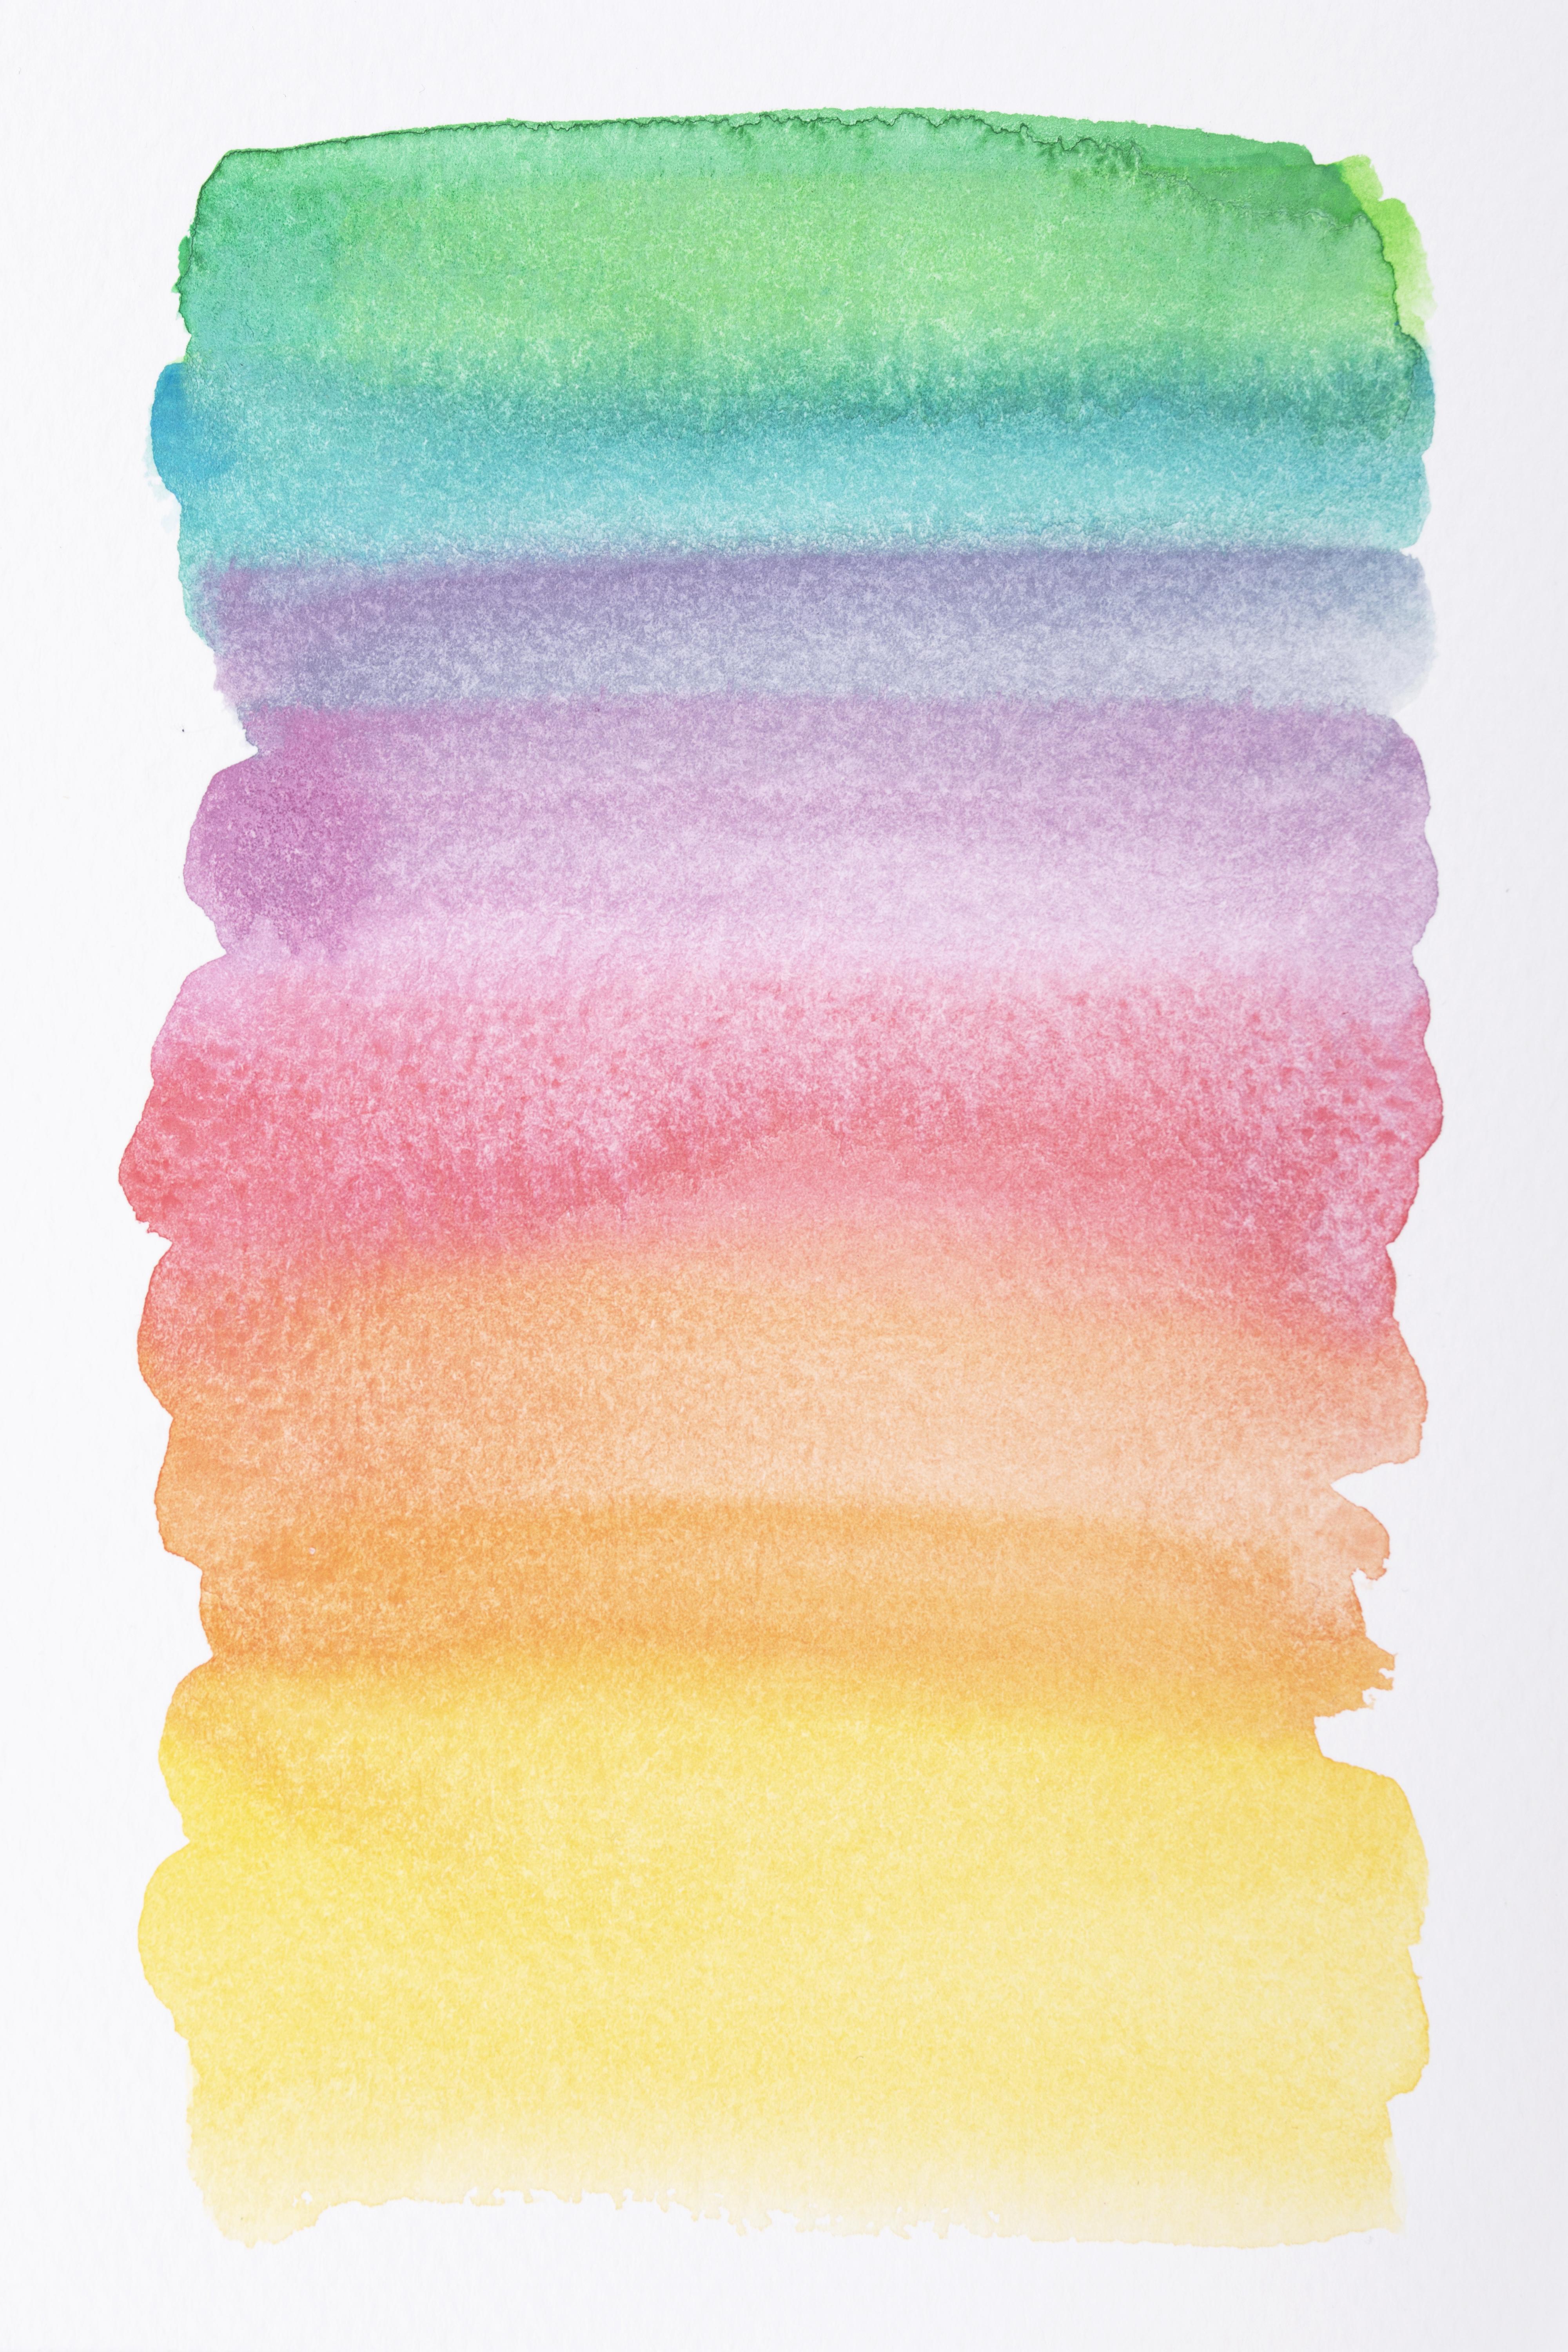 Spectrum of Colors (Green to Yellow) in Watercolor Paint